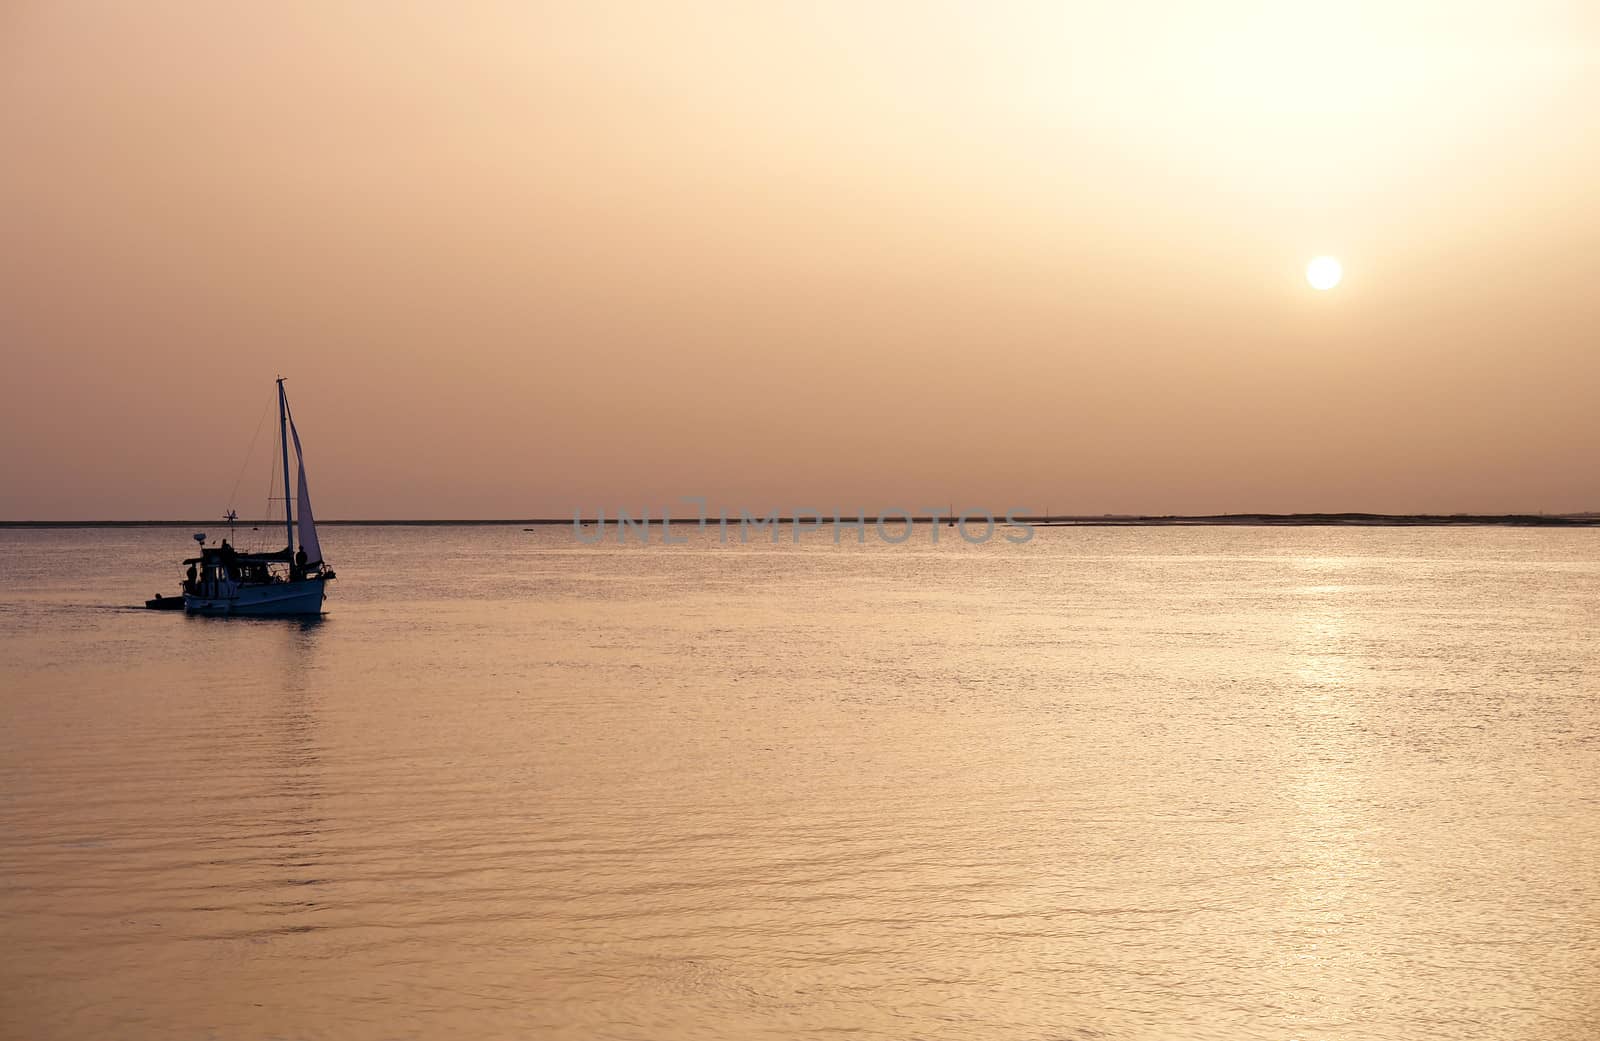 Recreation boat at sunset, in Ria Formosa, natural conservation region in Algarve, Portugal. 